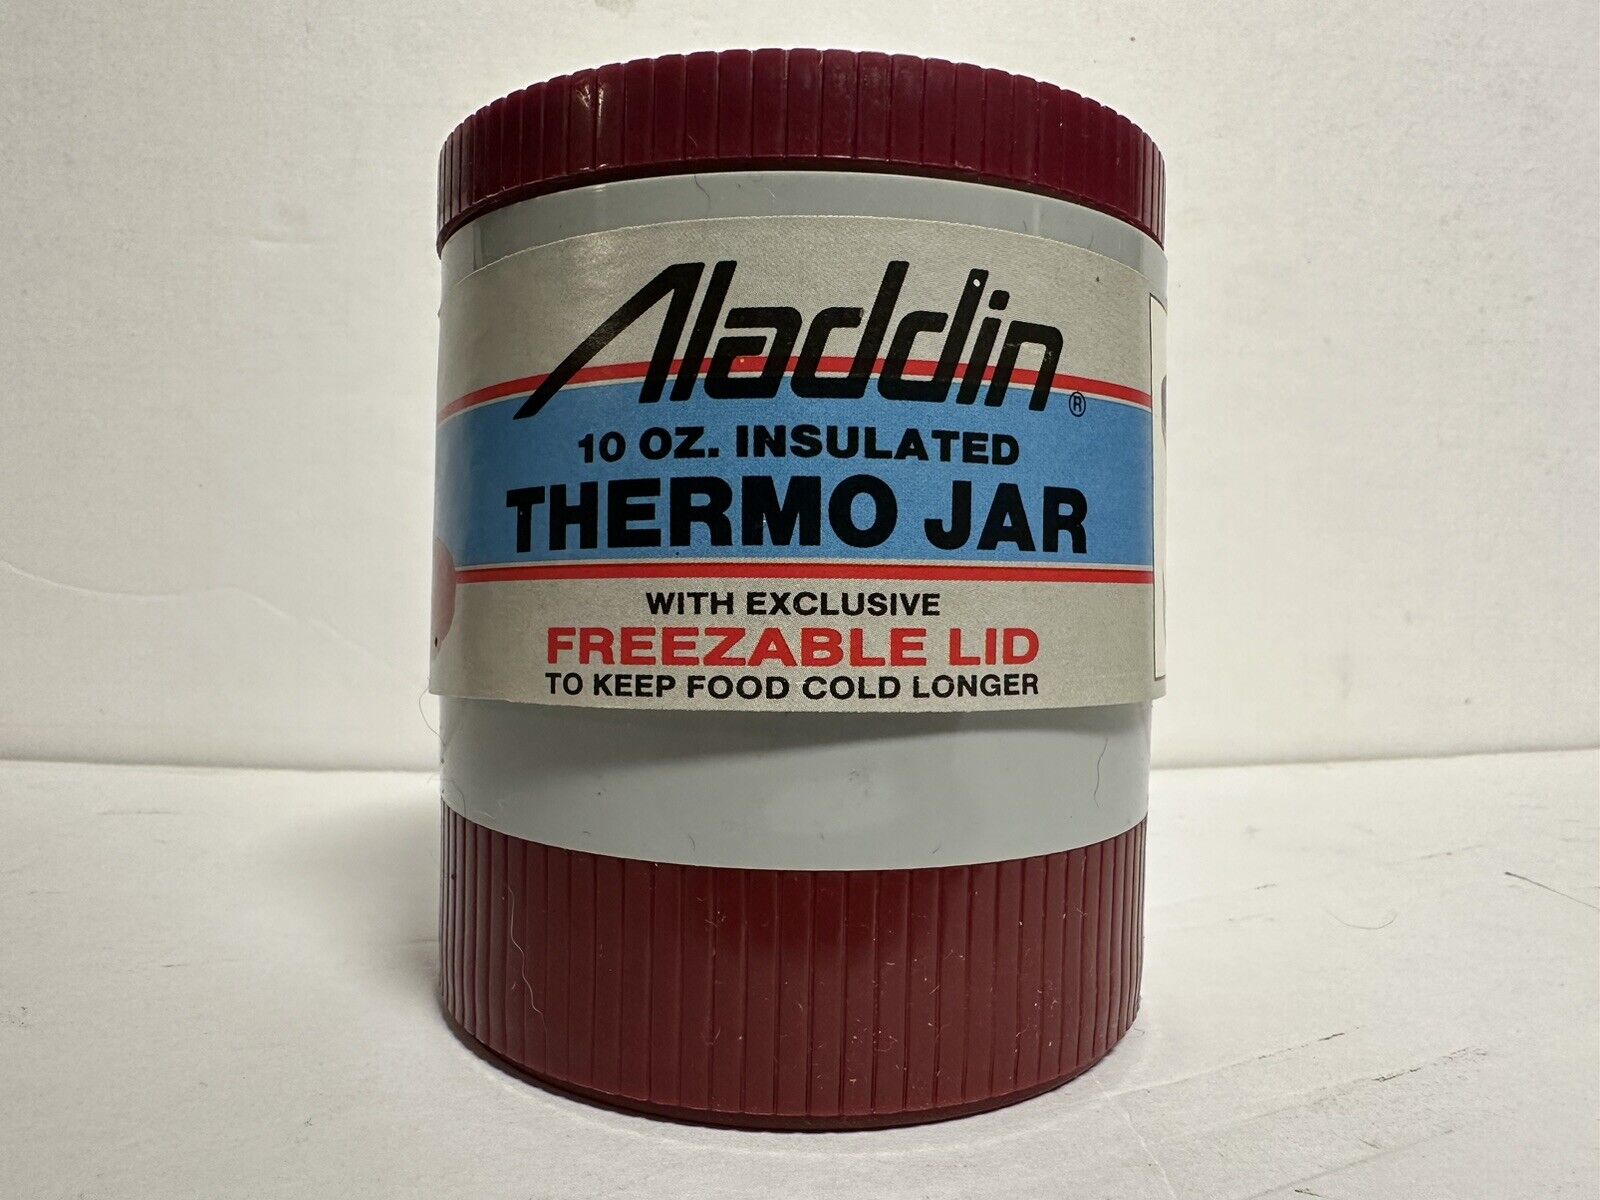 Vintage 1989 Aladdin 10 Oz Insulated Thermo Jar With Freezable Lid NOS